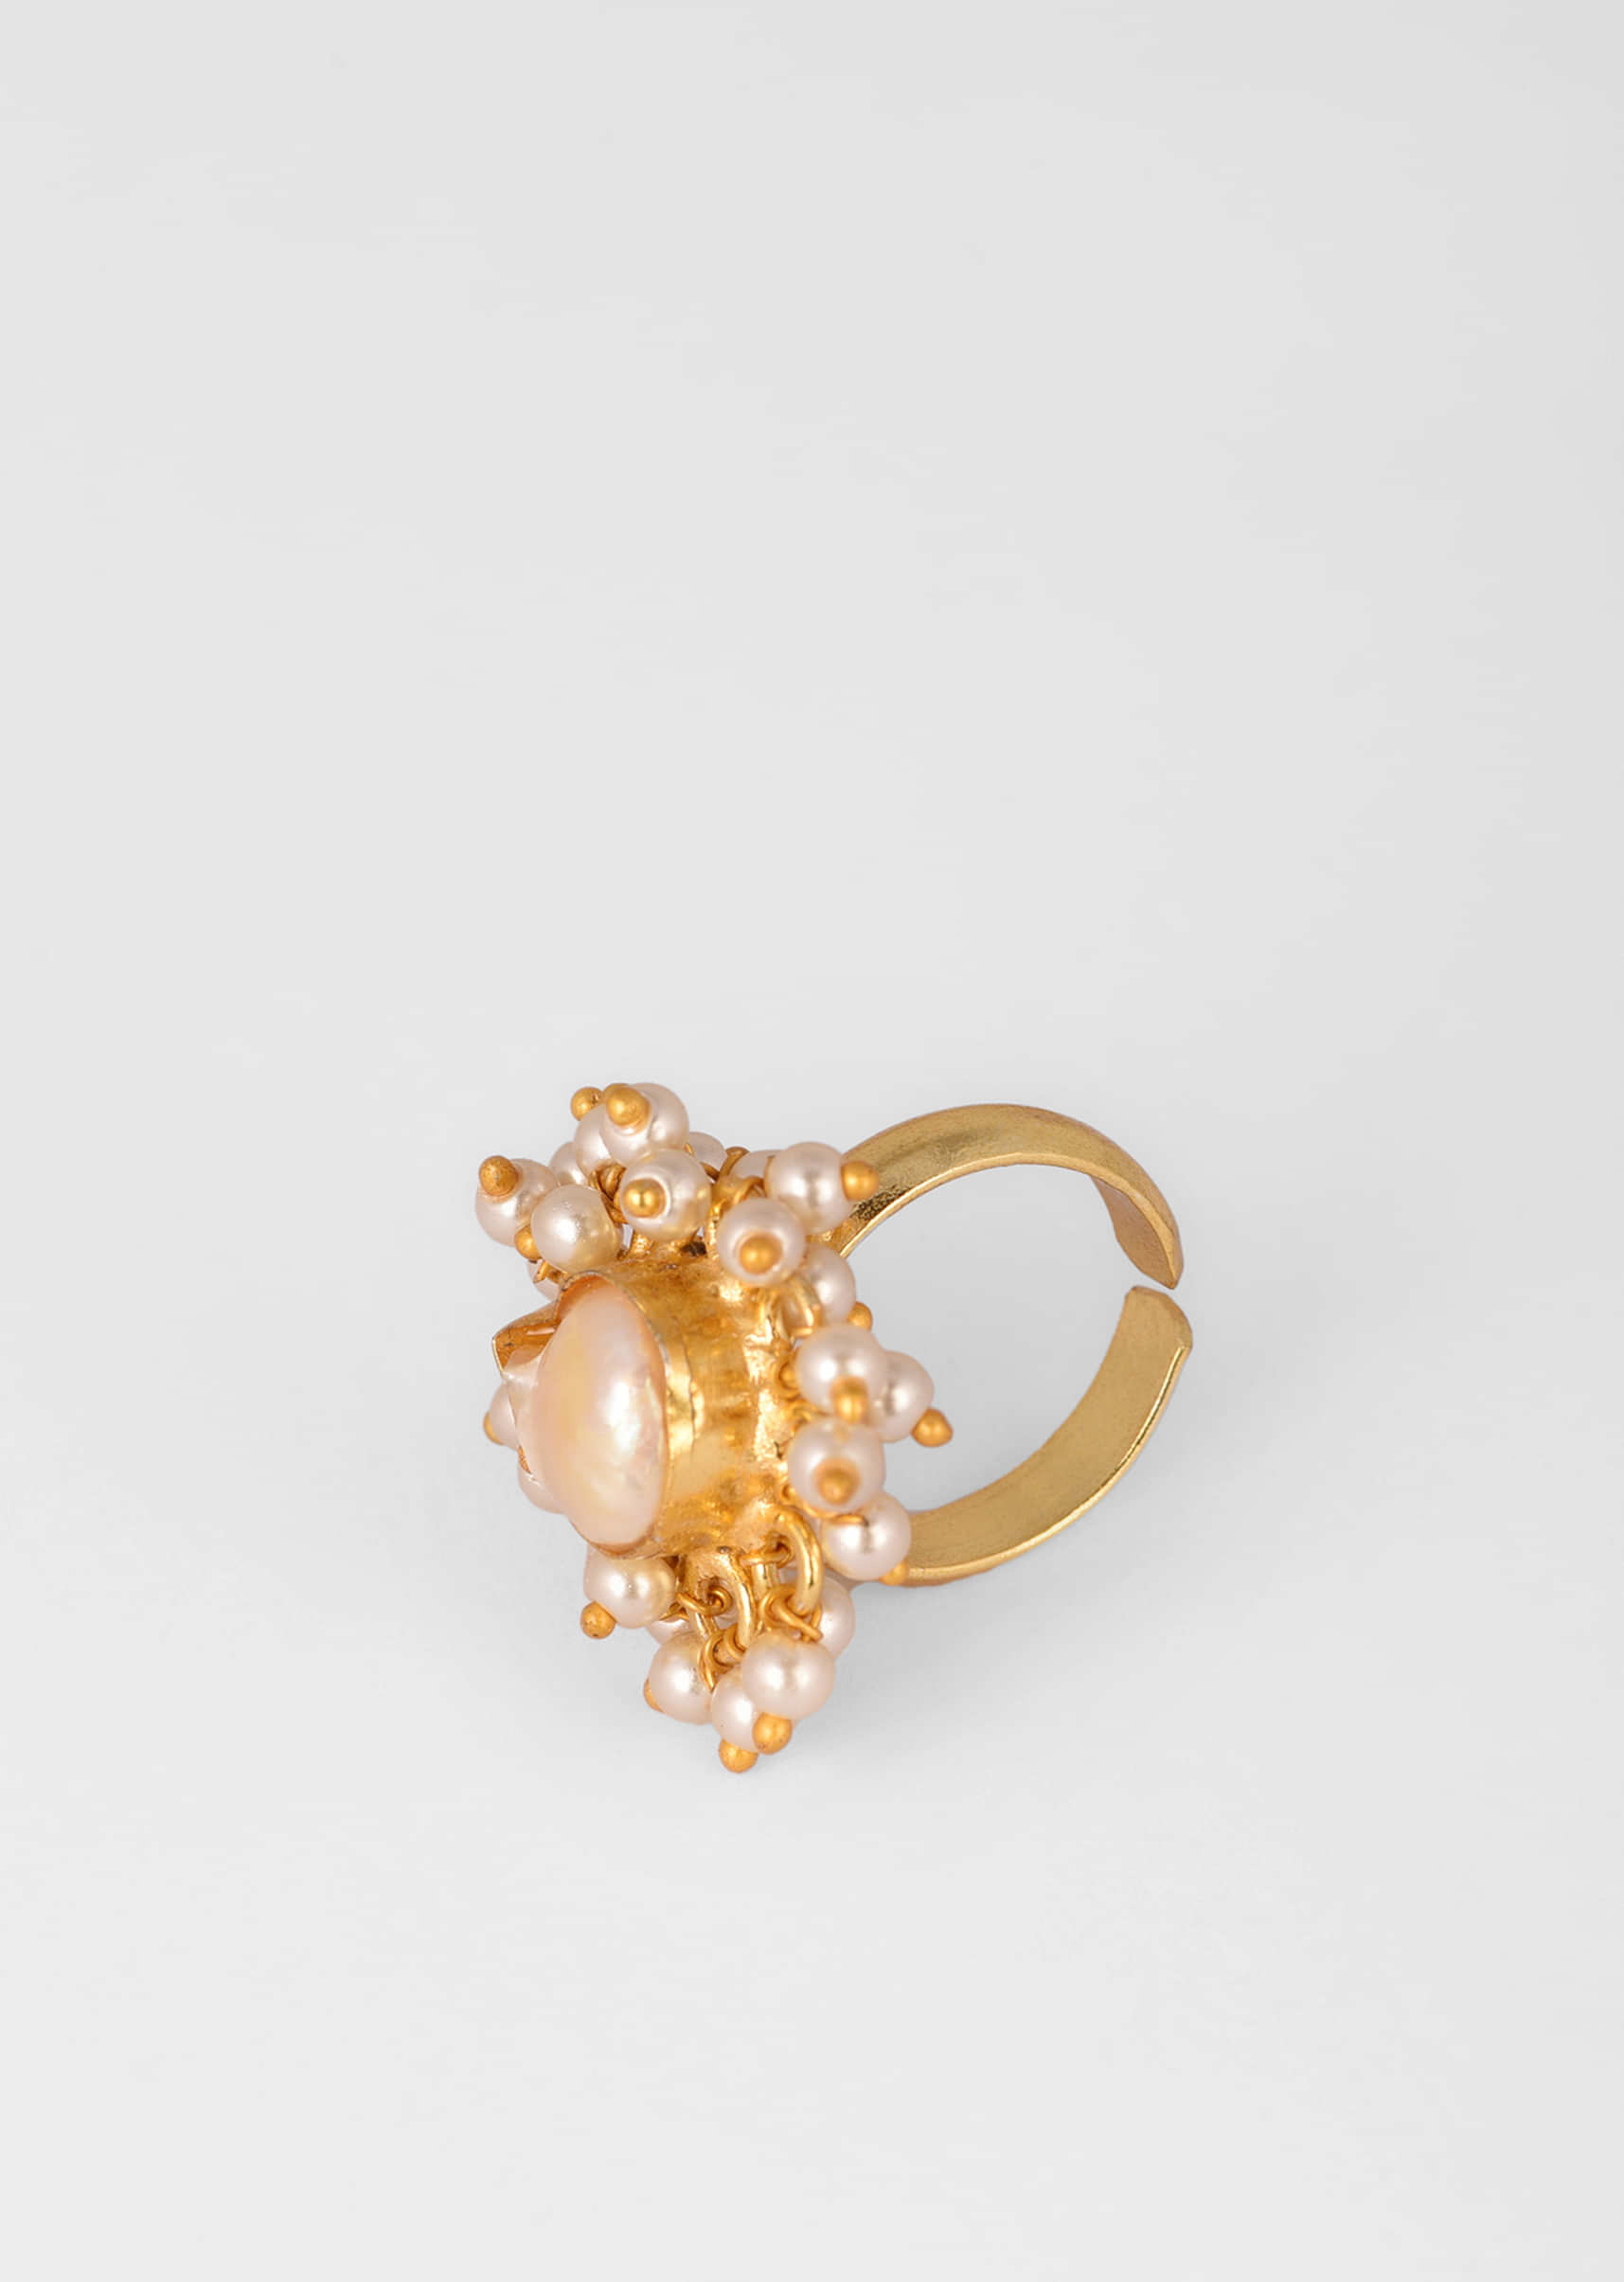 Gold Plated Ring With A Drop Shaped Baroque Pearl Centre And Tiny Pearls 